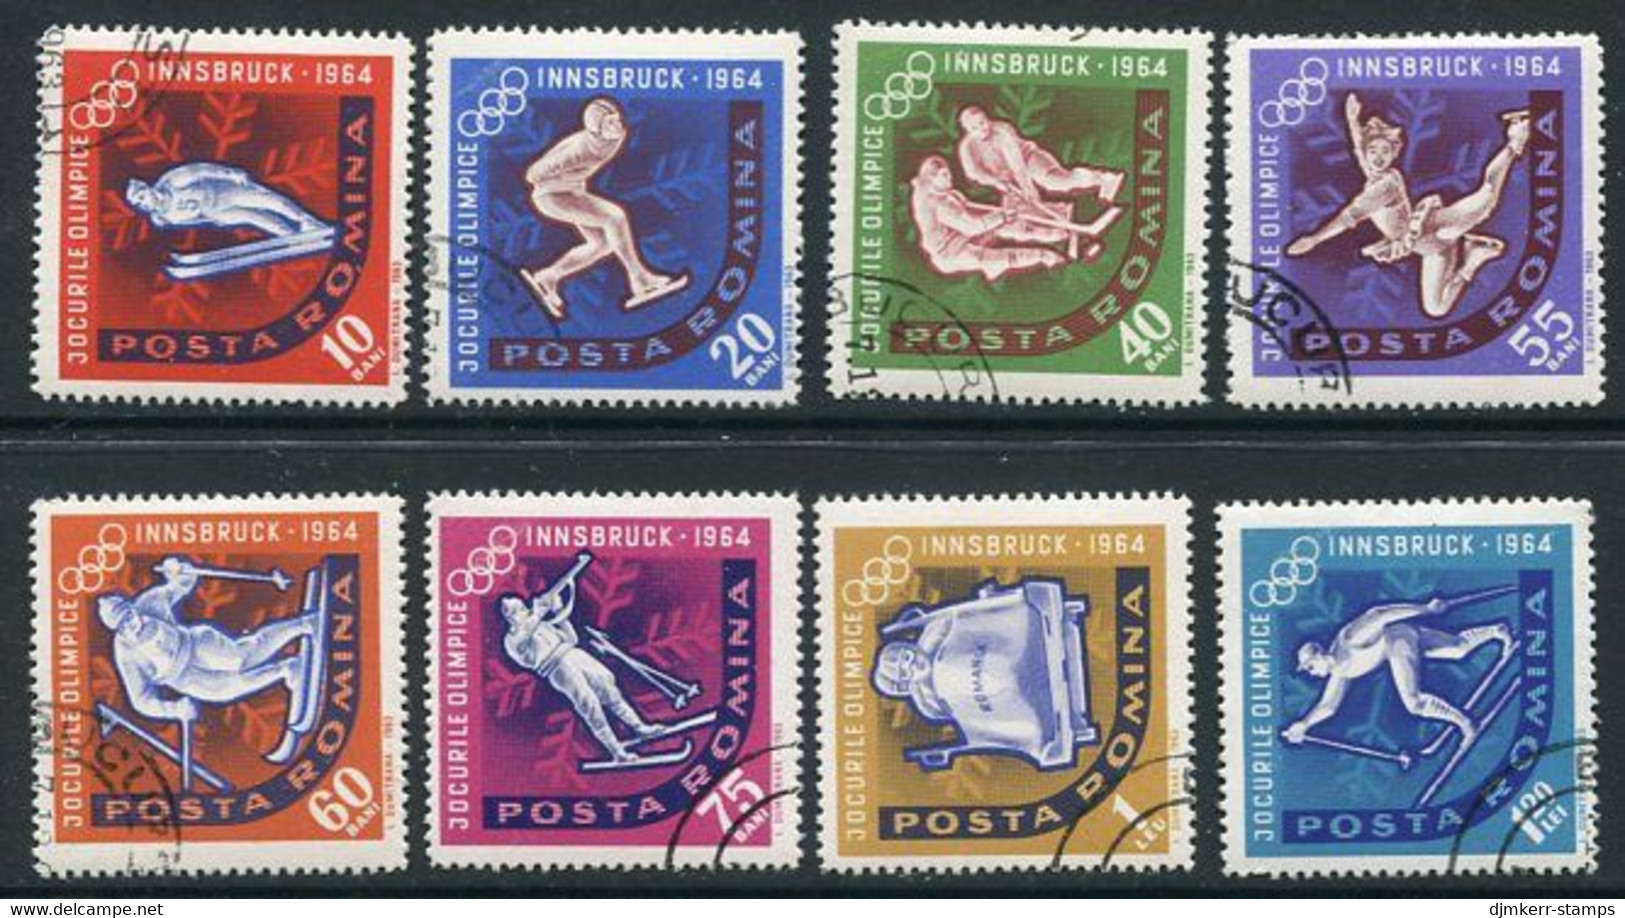 ROMANIA 1963 Innsbruck Winter Olympics Perforated Used.  Michel 2195-202 - Used Stamps